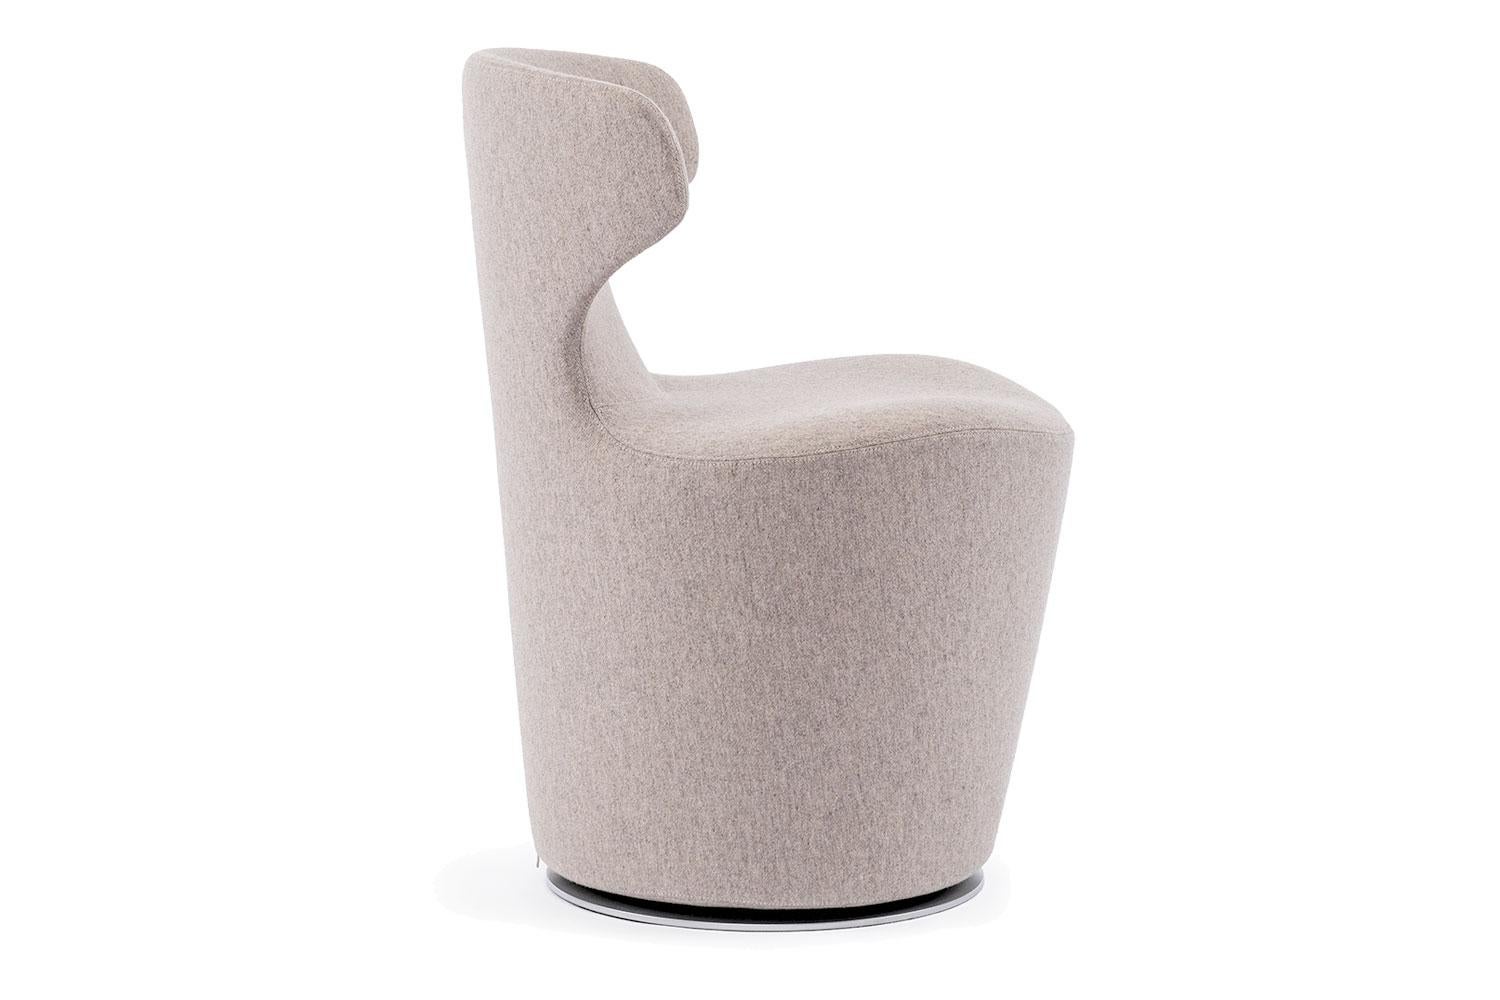 Modern Neutral Wool Cashmere Upholstered Swivel Armchair by B&B Italia - Available Now